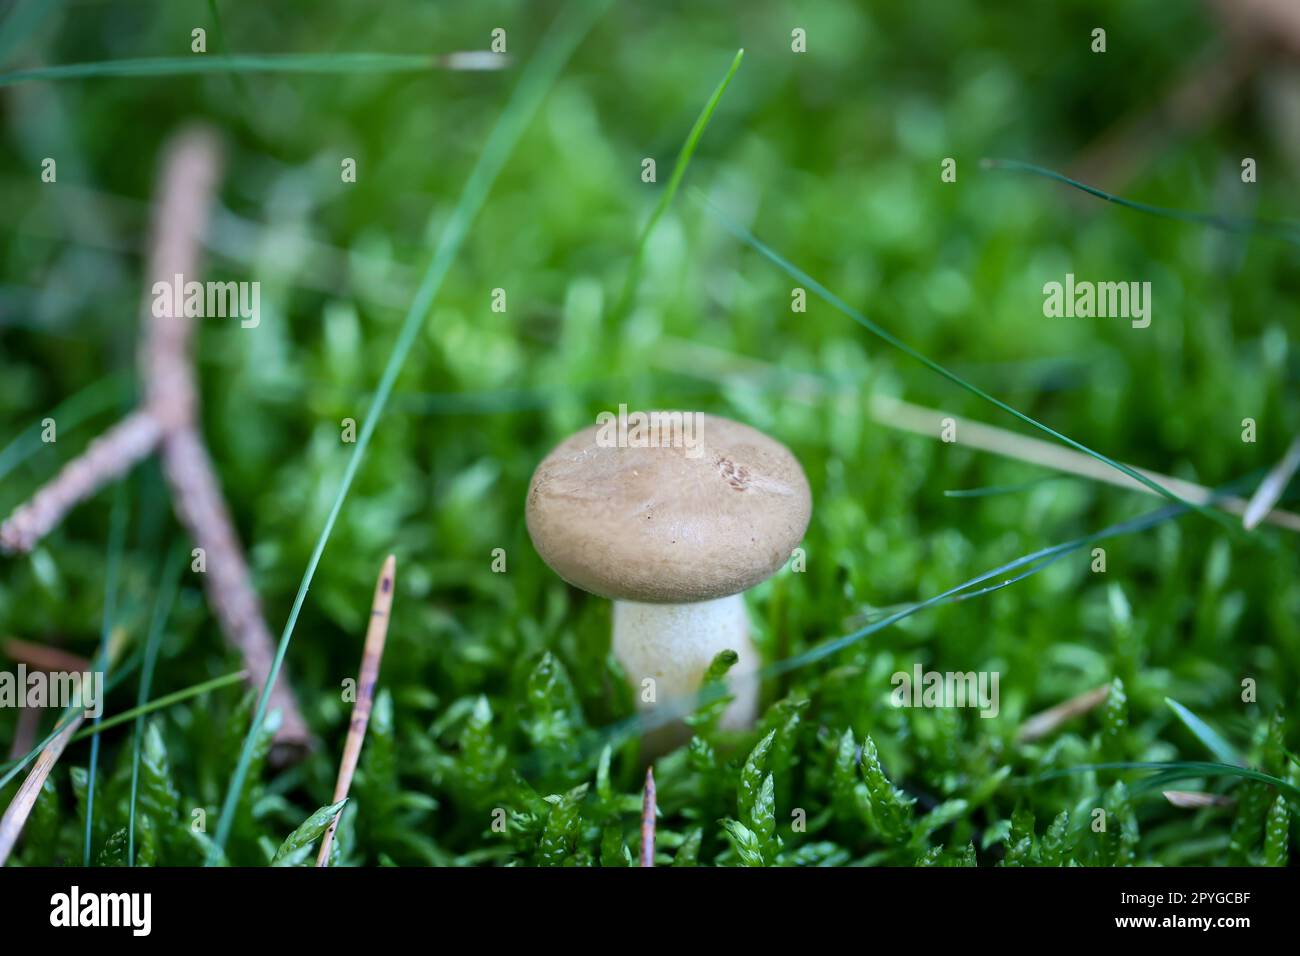 A mushroom well hidden and camouflaged between moss and grass. Stock Photo